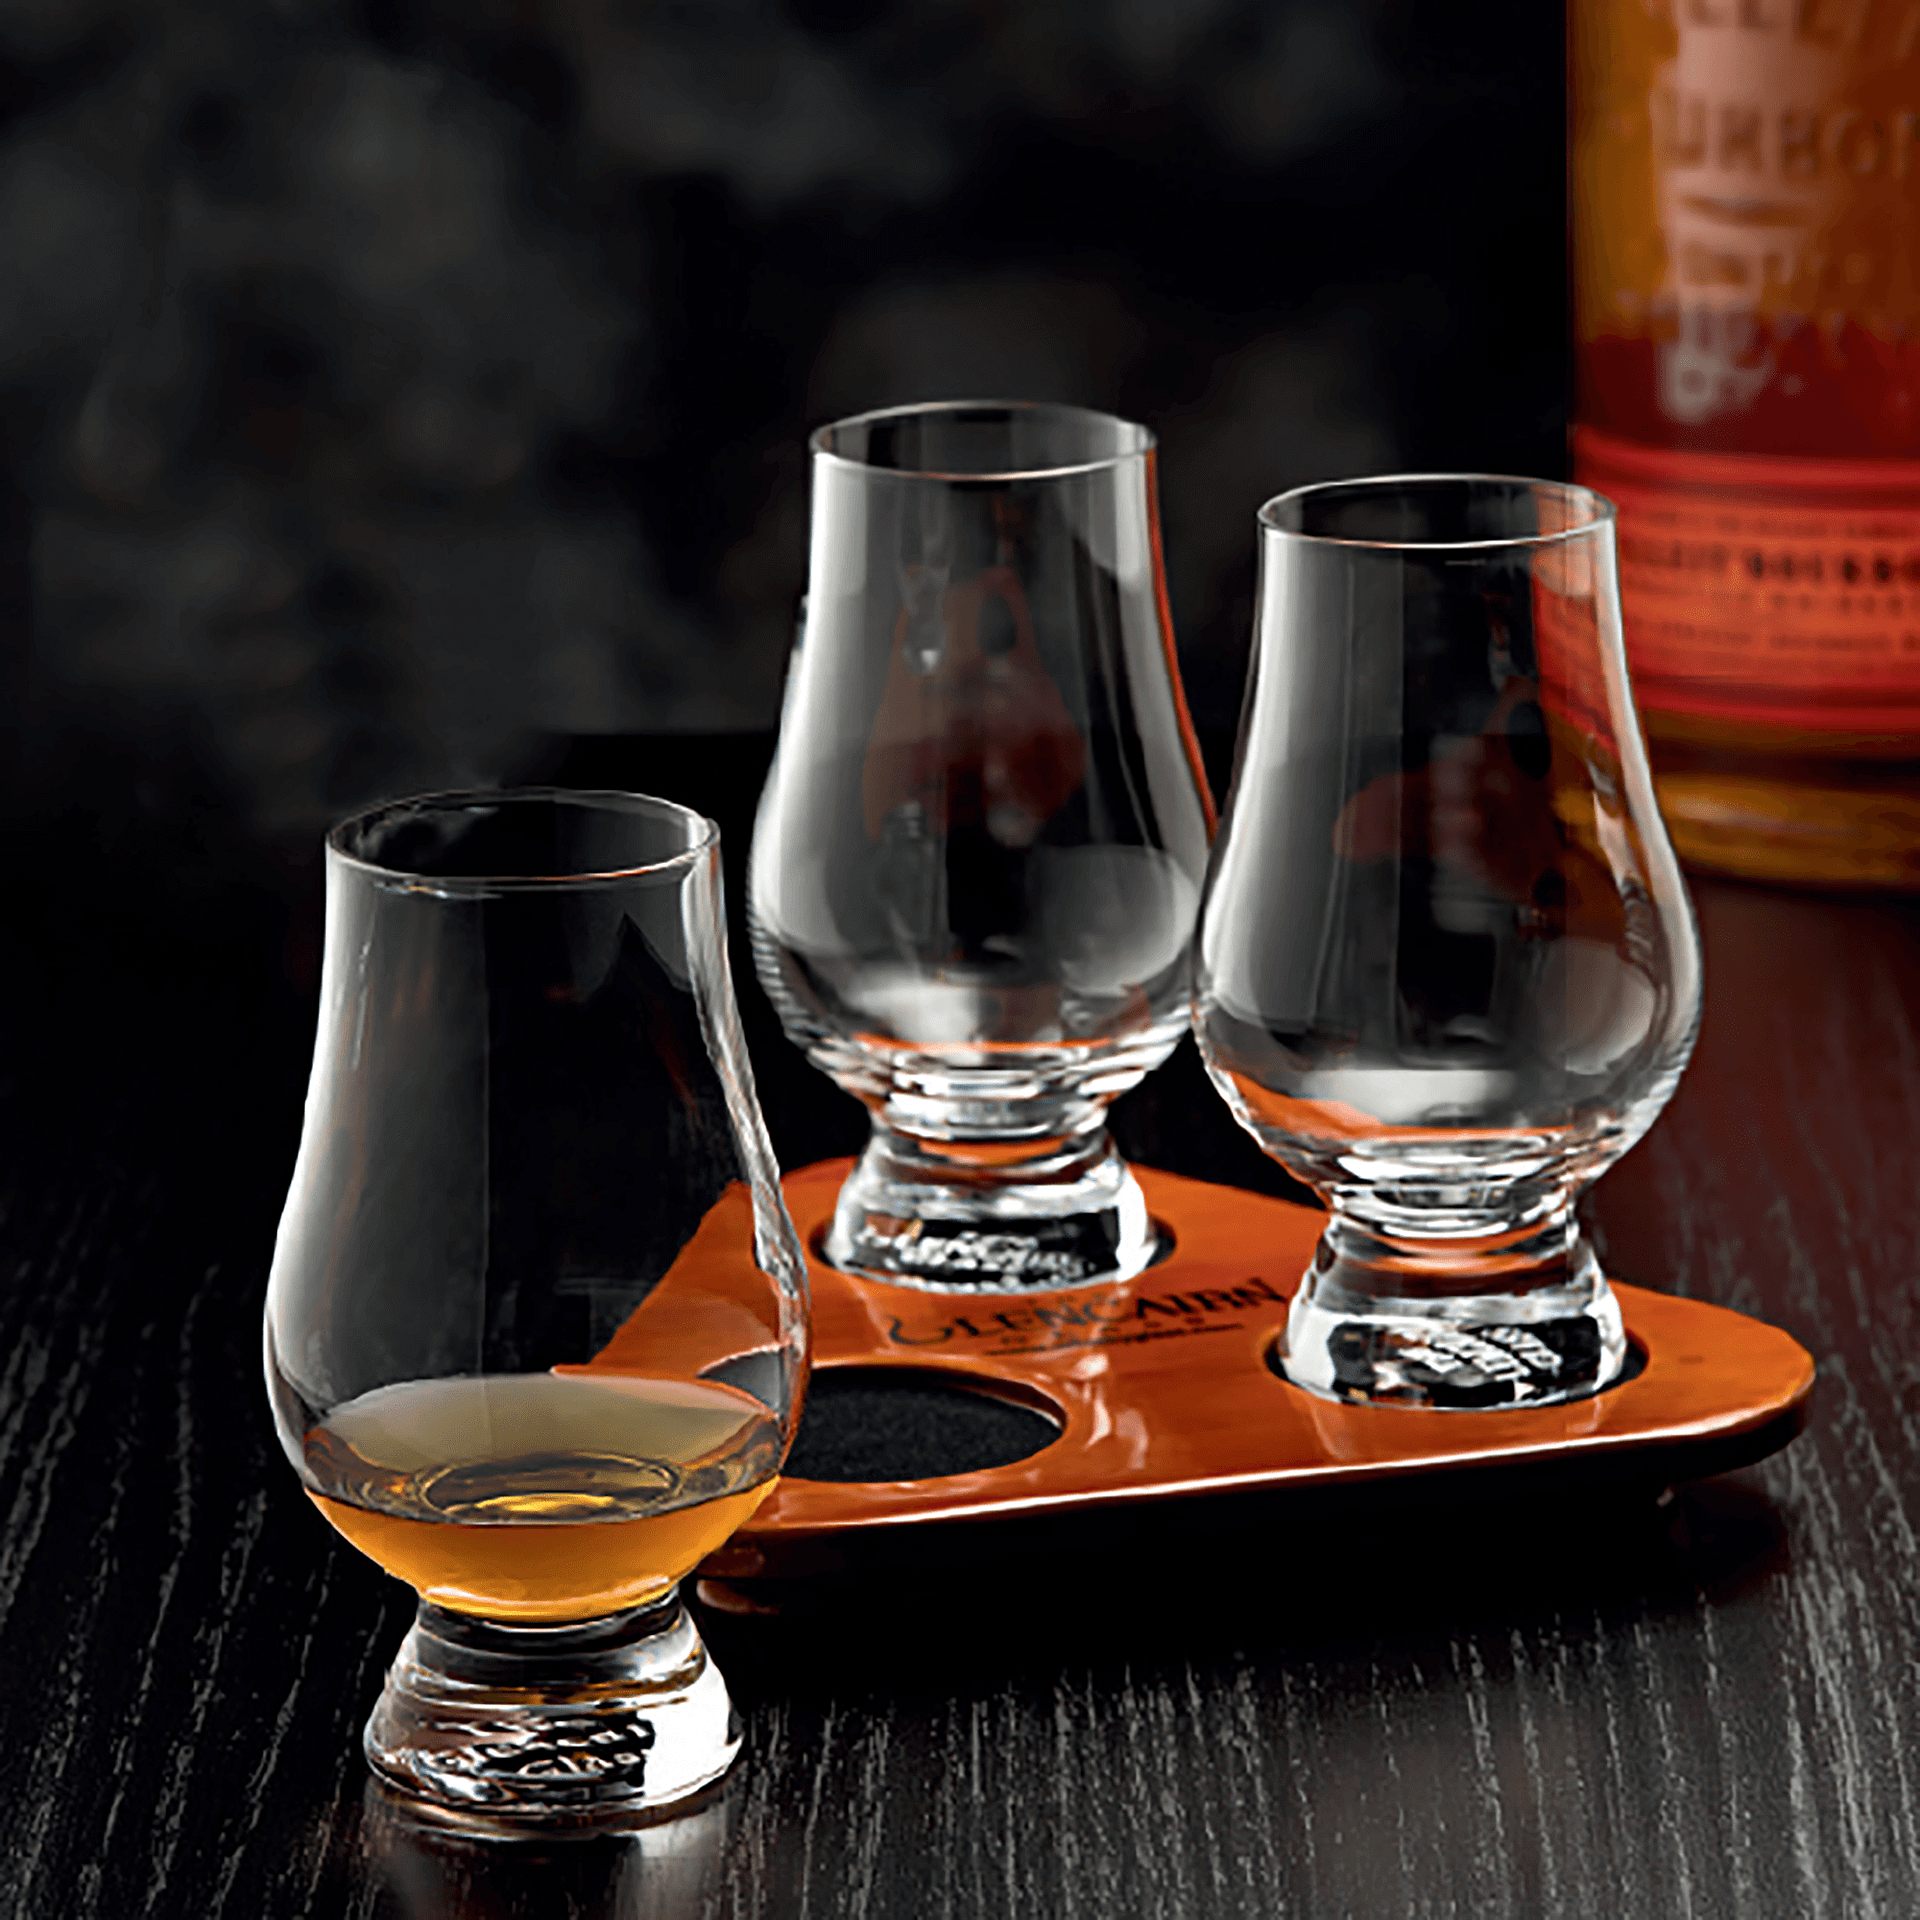 Engraved 6oz. Glencairn Glasses 3 Piece Set with Flight Tray - Item 3555331 - Barware Hub - Barware Swag and Etched Gifts